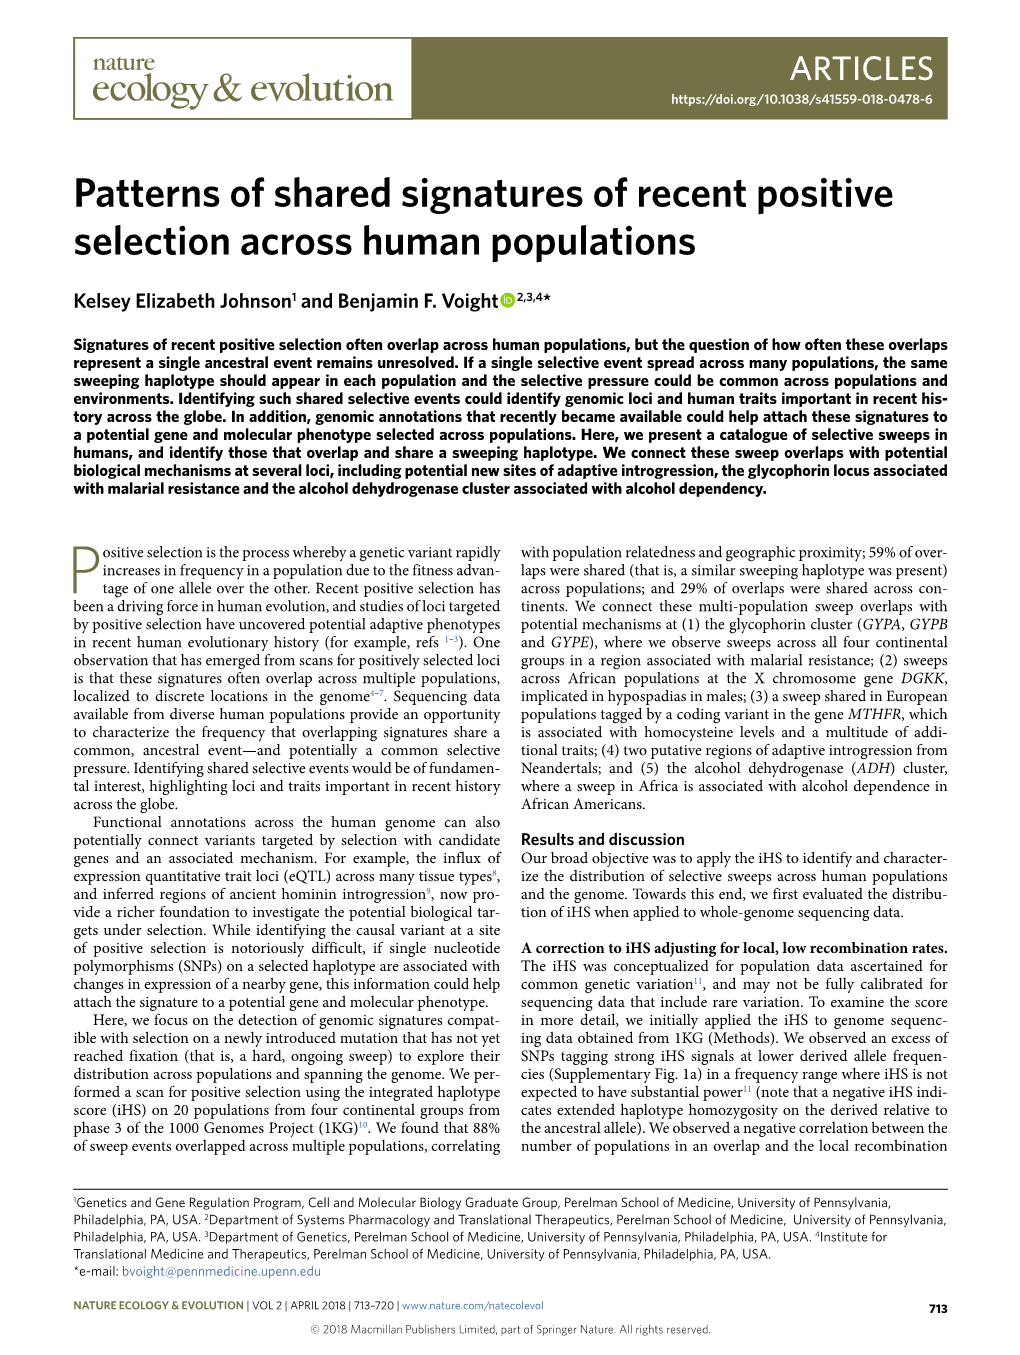 Patterns of Shared Signatures of Recent Positive Selection Across Human Populations